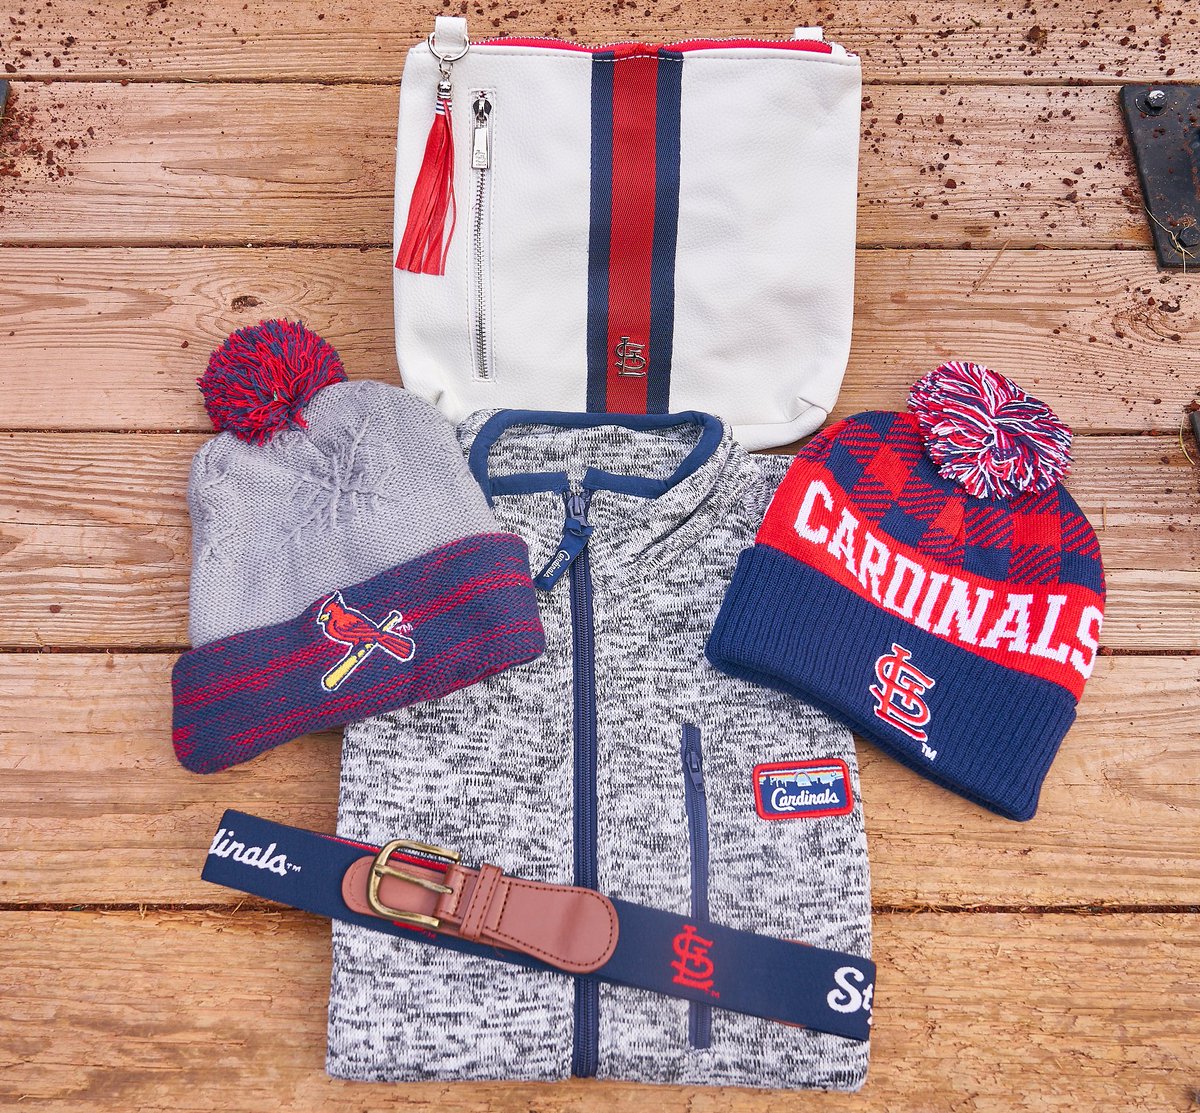 We're giving away the 2021 Cardinals purse, a $100 Cardinals gift card, and the other items below. RT for your chance to win!